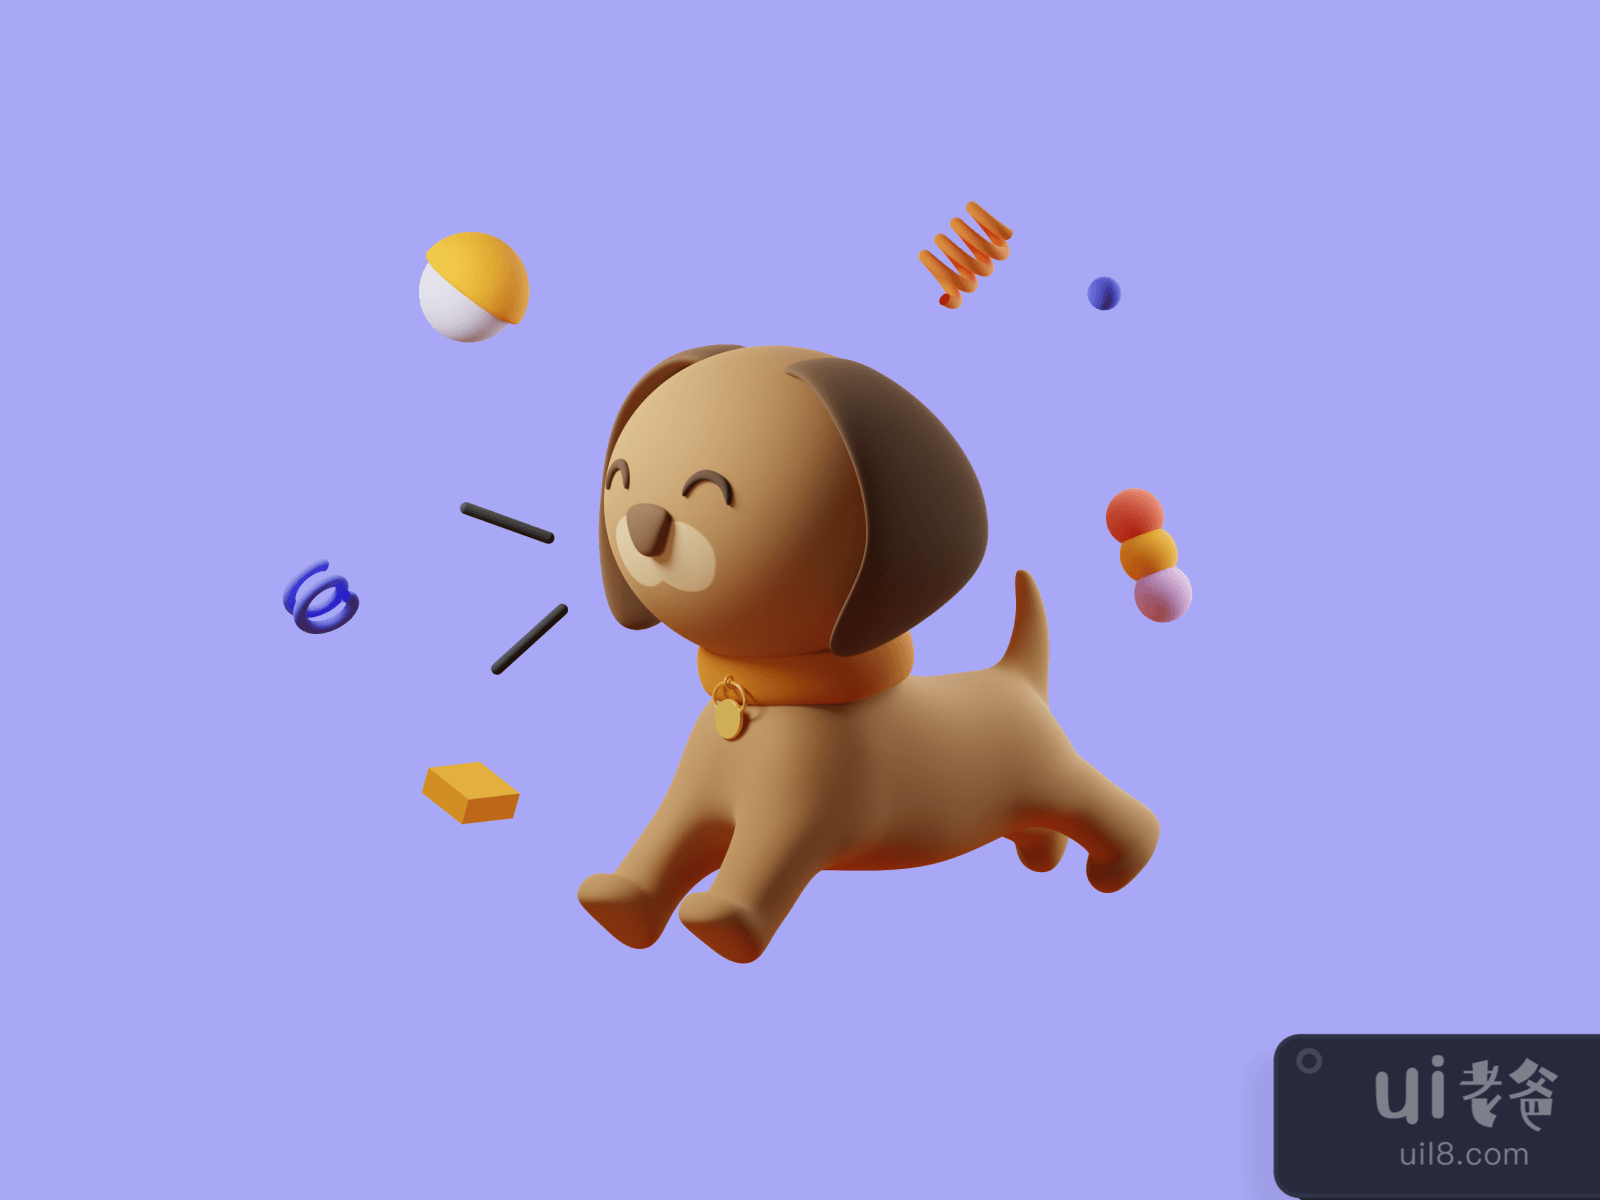 3D Illustration Pack for Figma and Adobe XD No 4